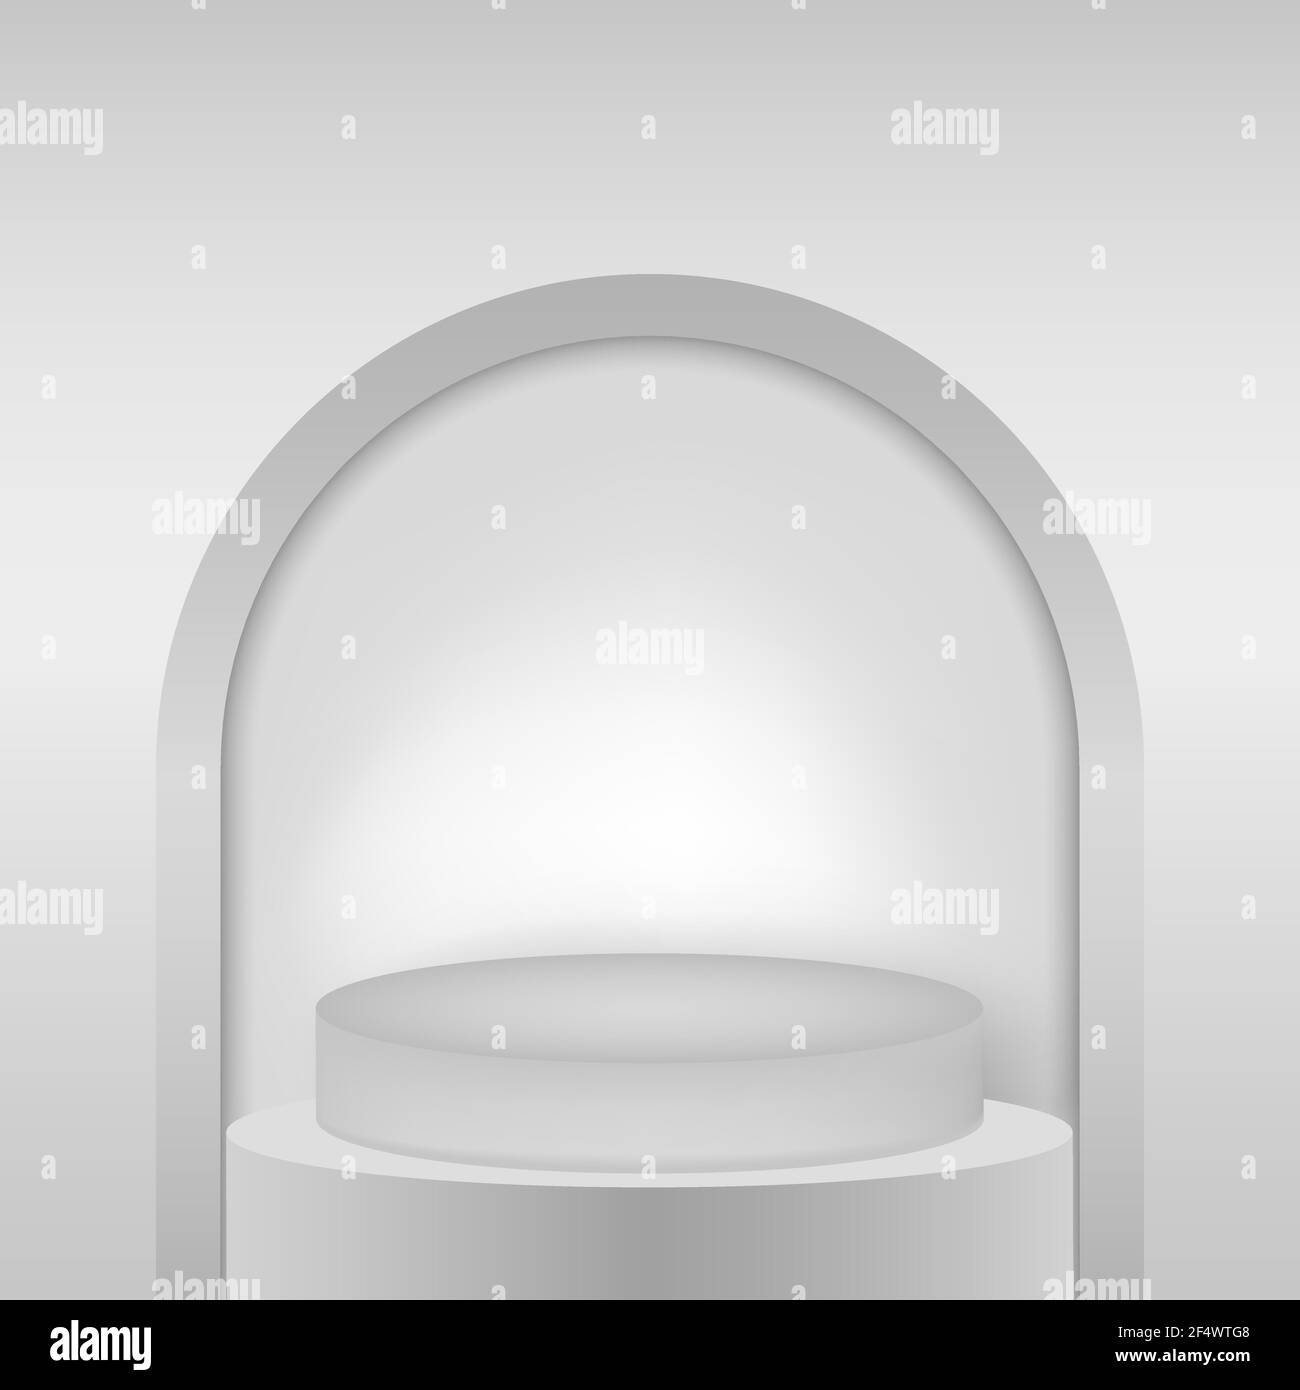 Round presentation podium with arch. Editable background vector illustration Stock Vector